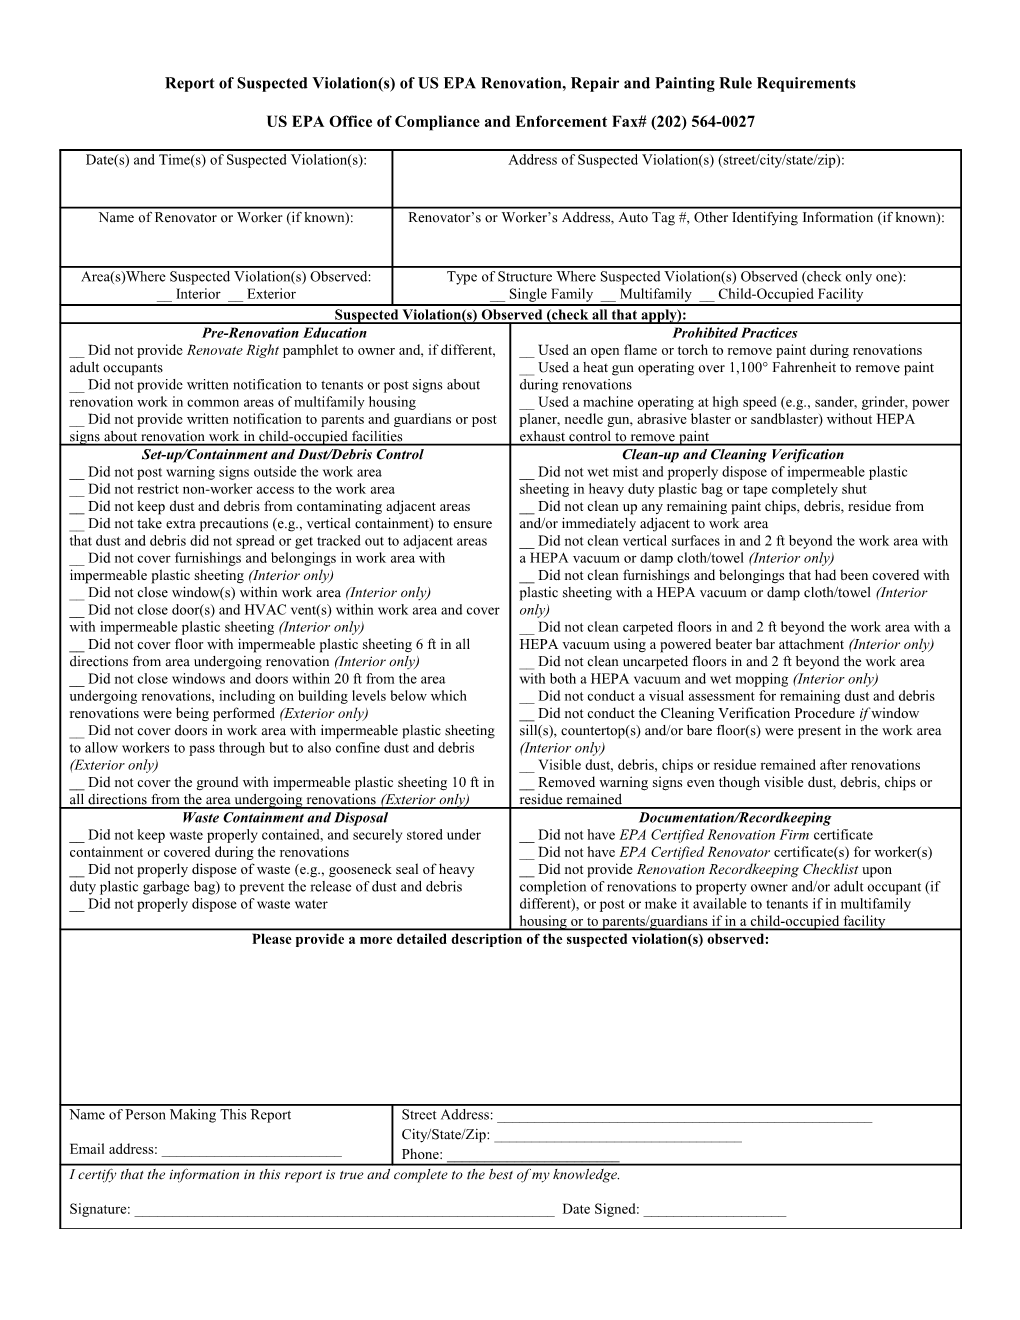 Form for Reporting Suspected Violations of the Federal Renovation, Repair and Painting